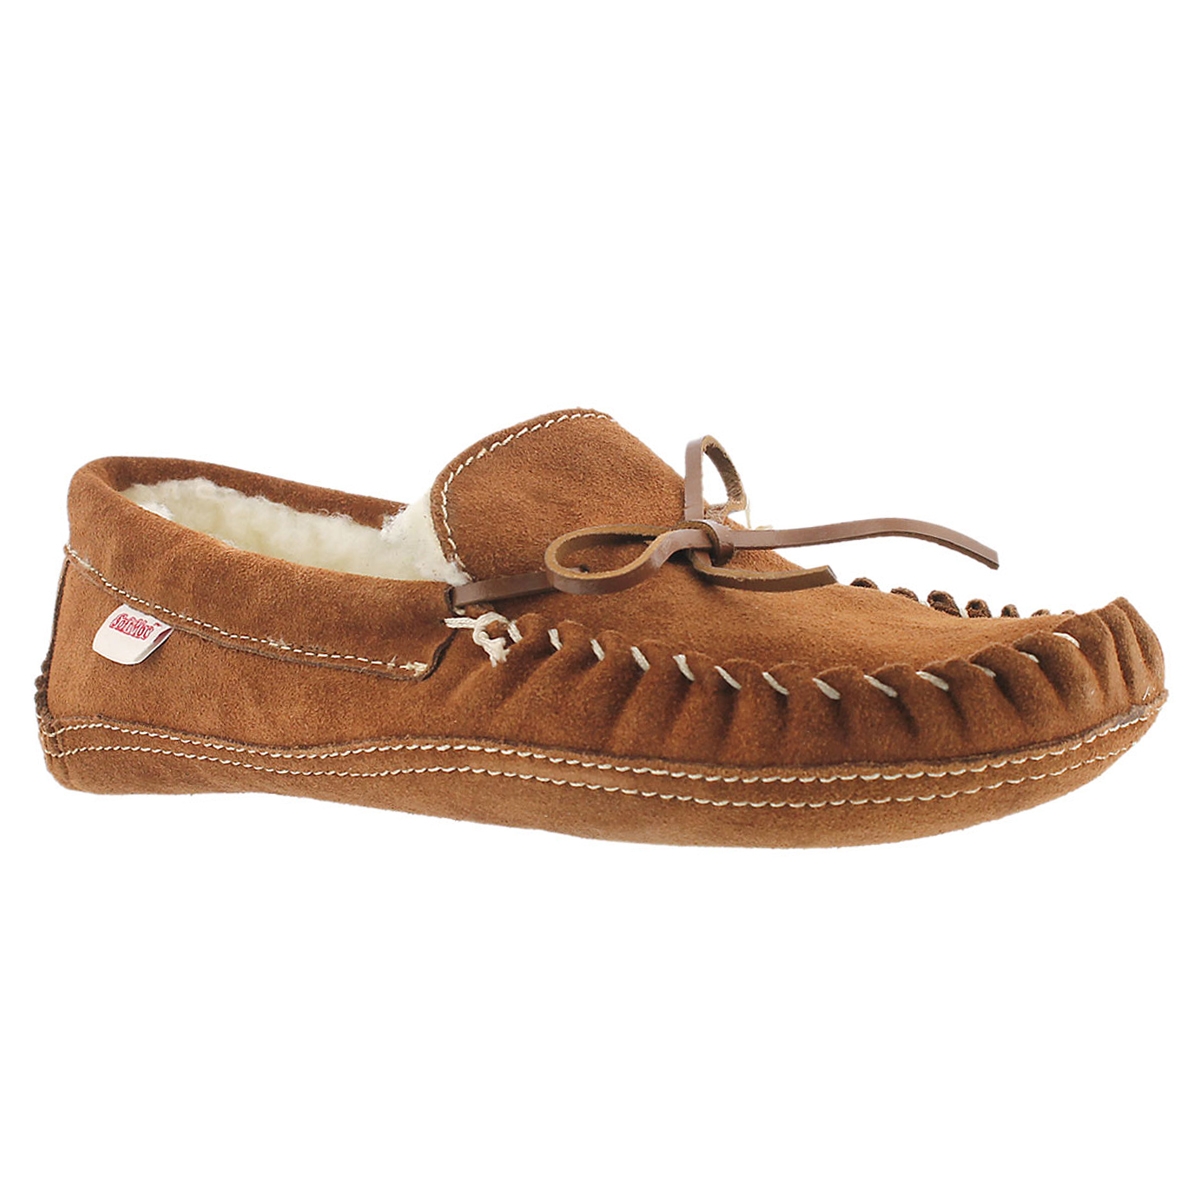 SoftMoc Men's 1135 Double Sole Lined Moccasin | eBay